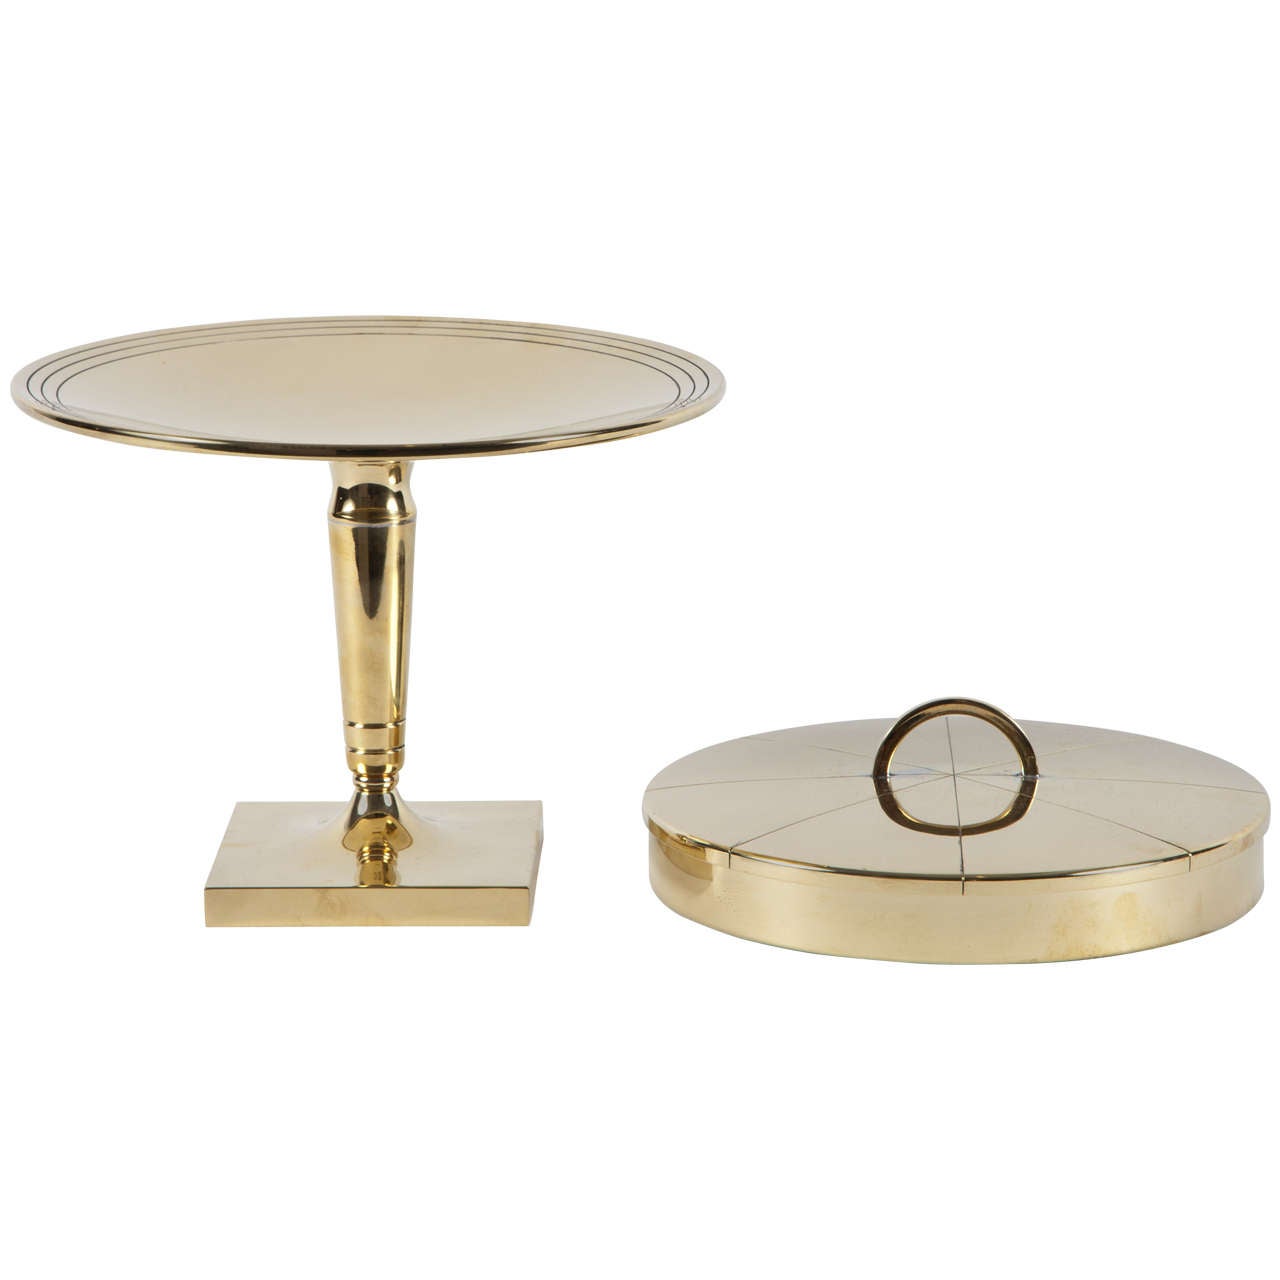 Pair of Brass Serving Pieces by Tommi Parzinger, Two Pieces